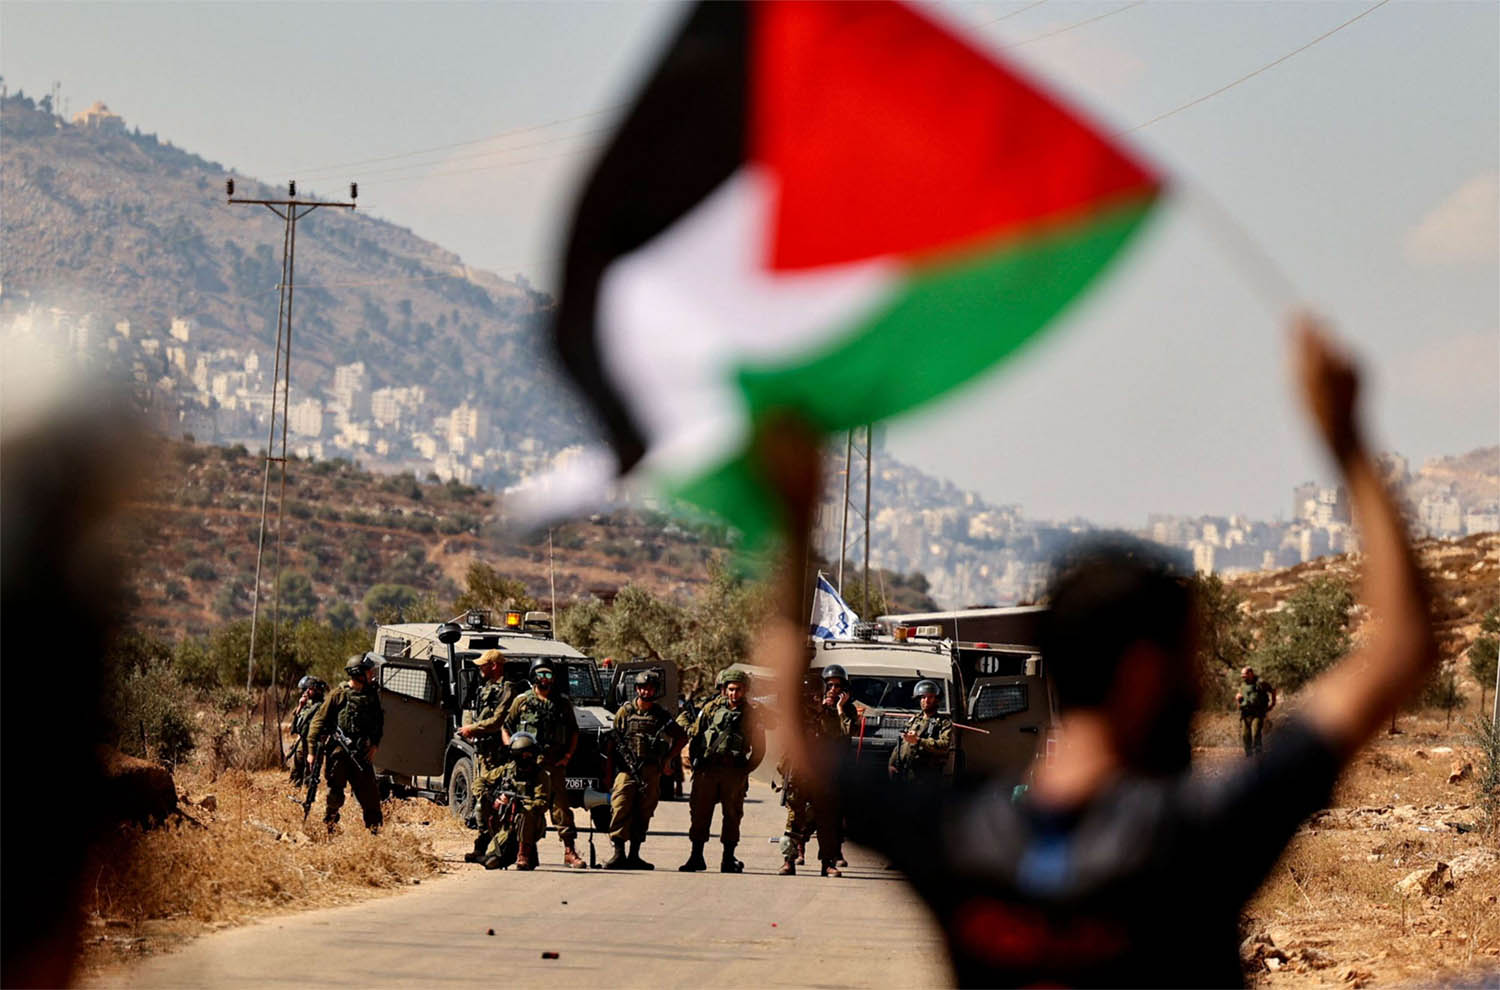 Ultimately a two-state solution remains the only viable option to end the conflict